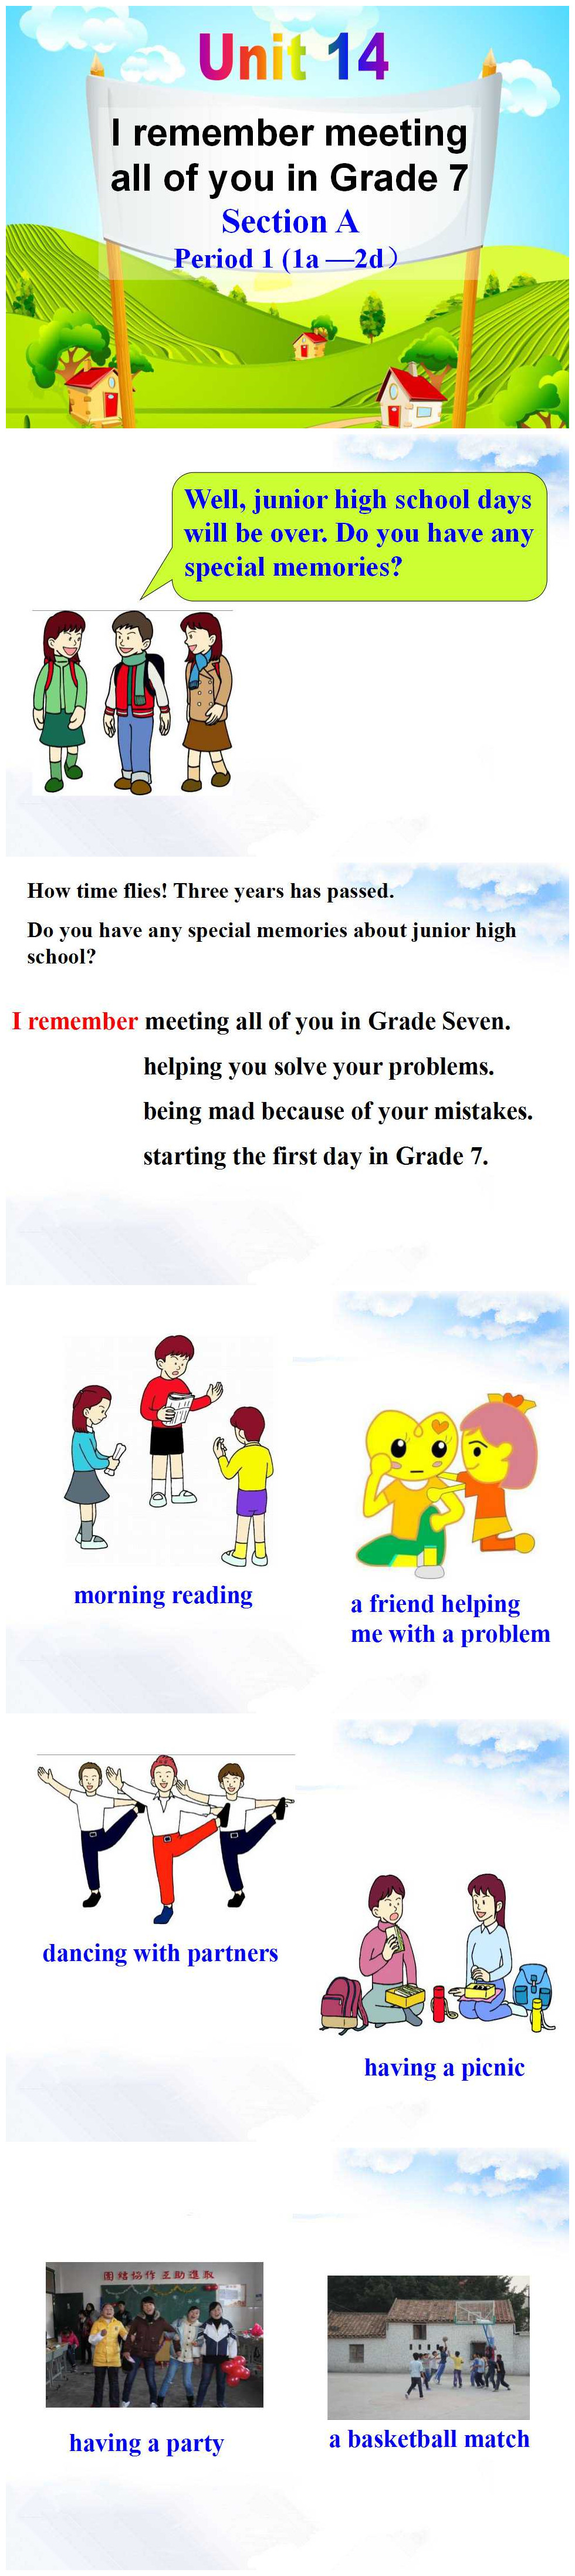 《I remember meeting all of you in Grade 7》PPT课件2